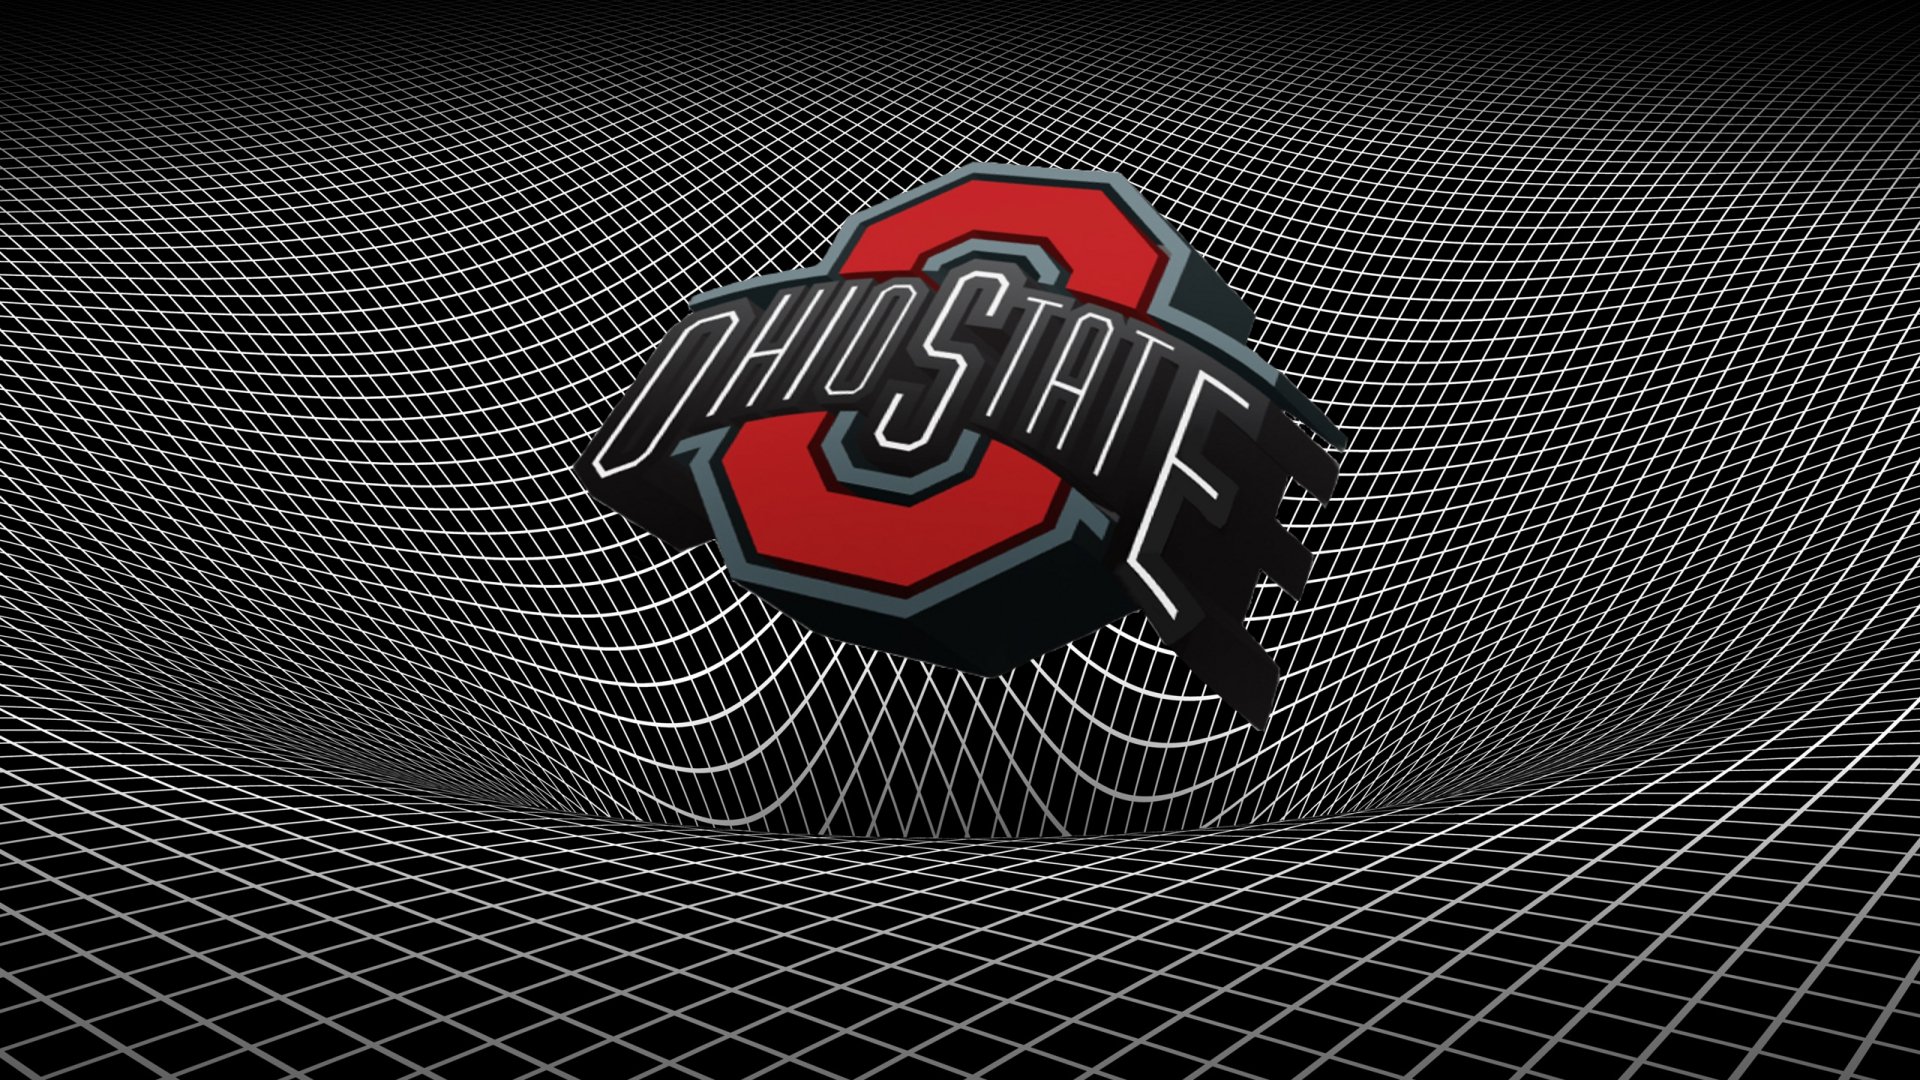 Ohio State Buckeyes College Football Poster Wallpaper Background